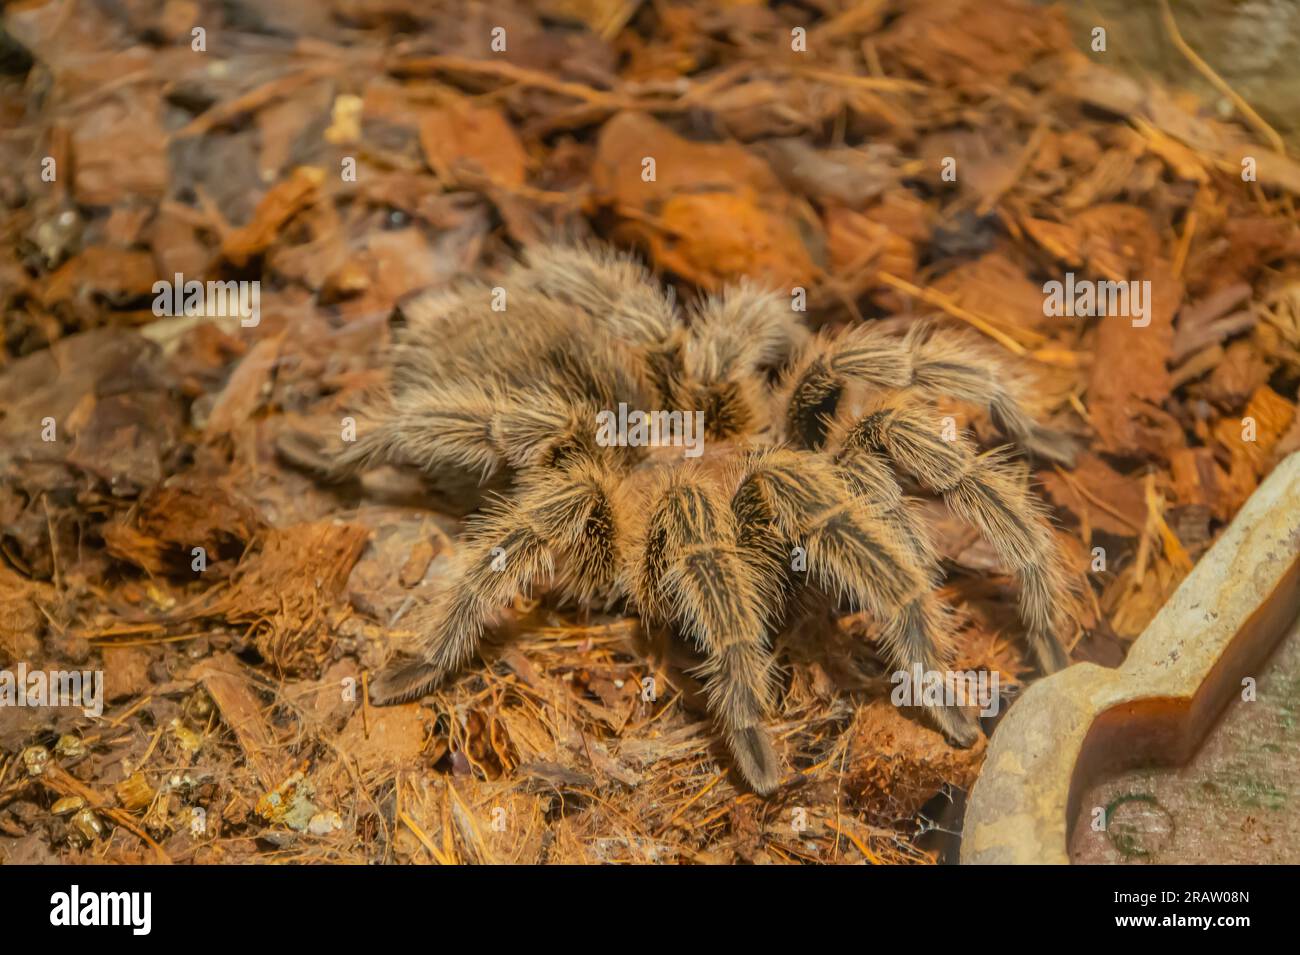 Chilean Rose Hair Tarantula Grammostola rosea. One of the most docile of tarantulas. This is generally the first pet tarantula people look for when bu Stock Photo